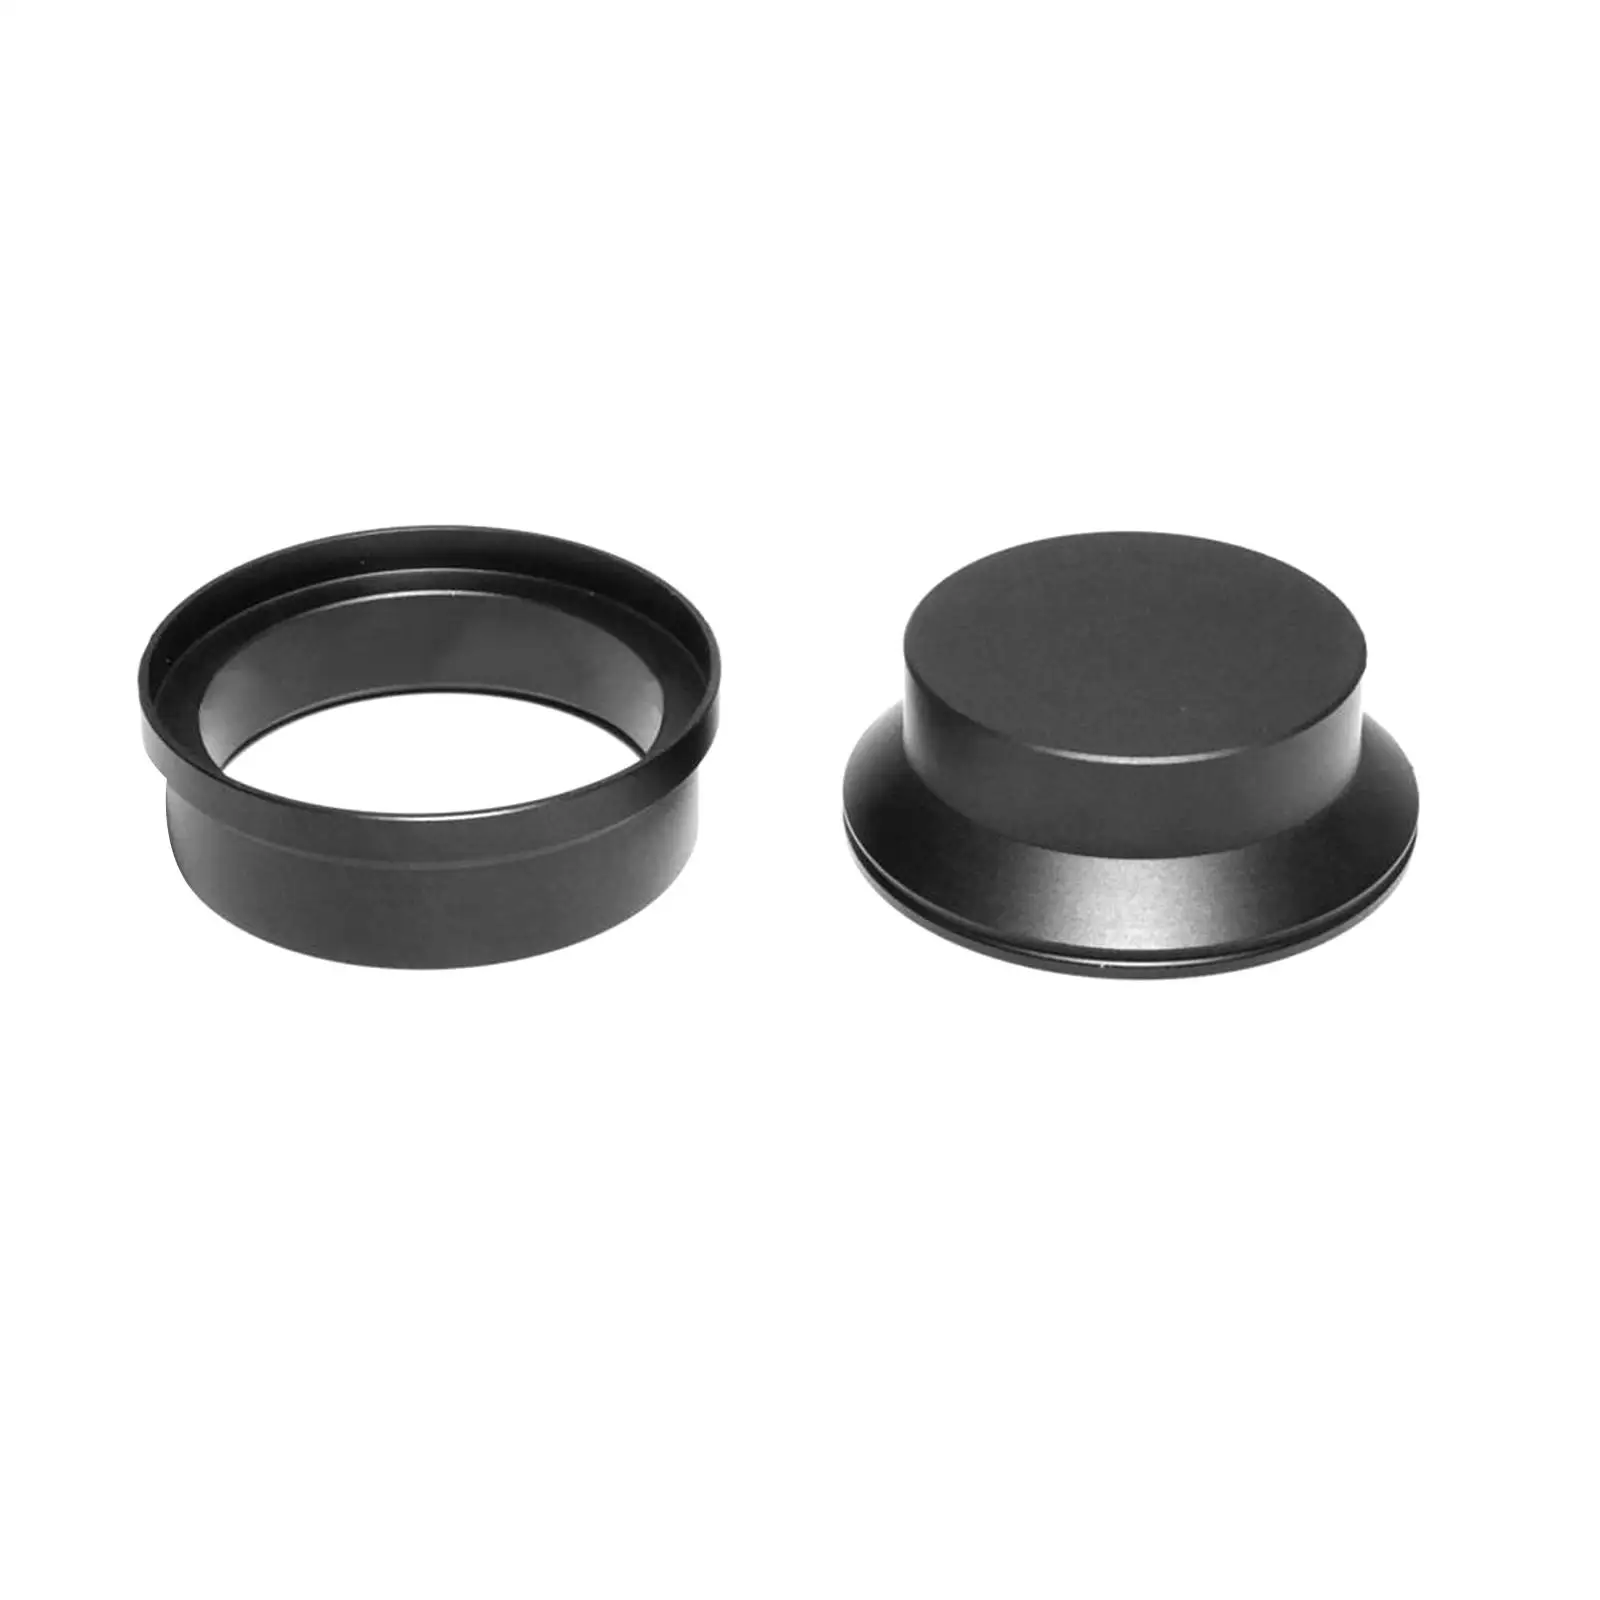 Metal Espresso Dosing Funnel Tamper Replacement 54mm Dosing Cup Hands Free Coffee Rings for 54mm Portafilter Accessories